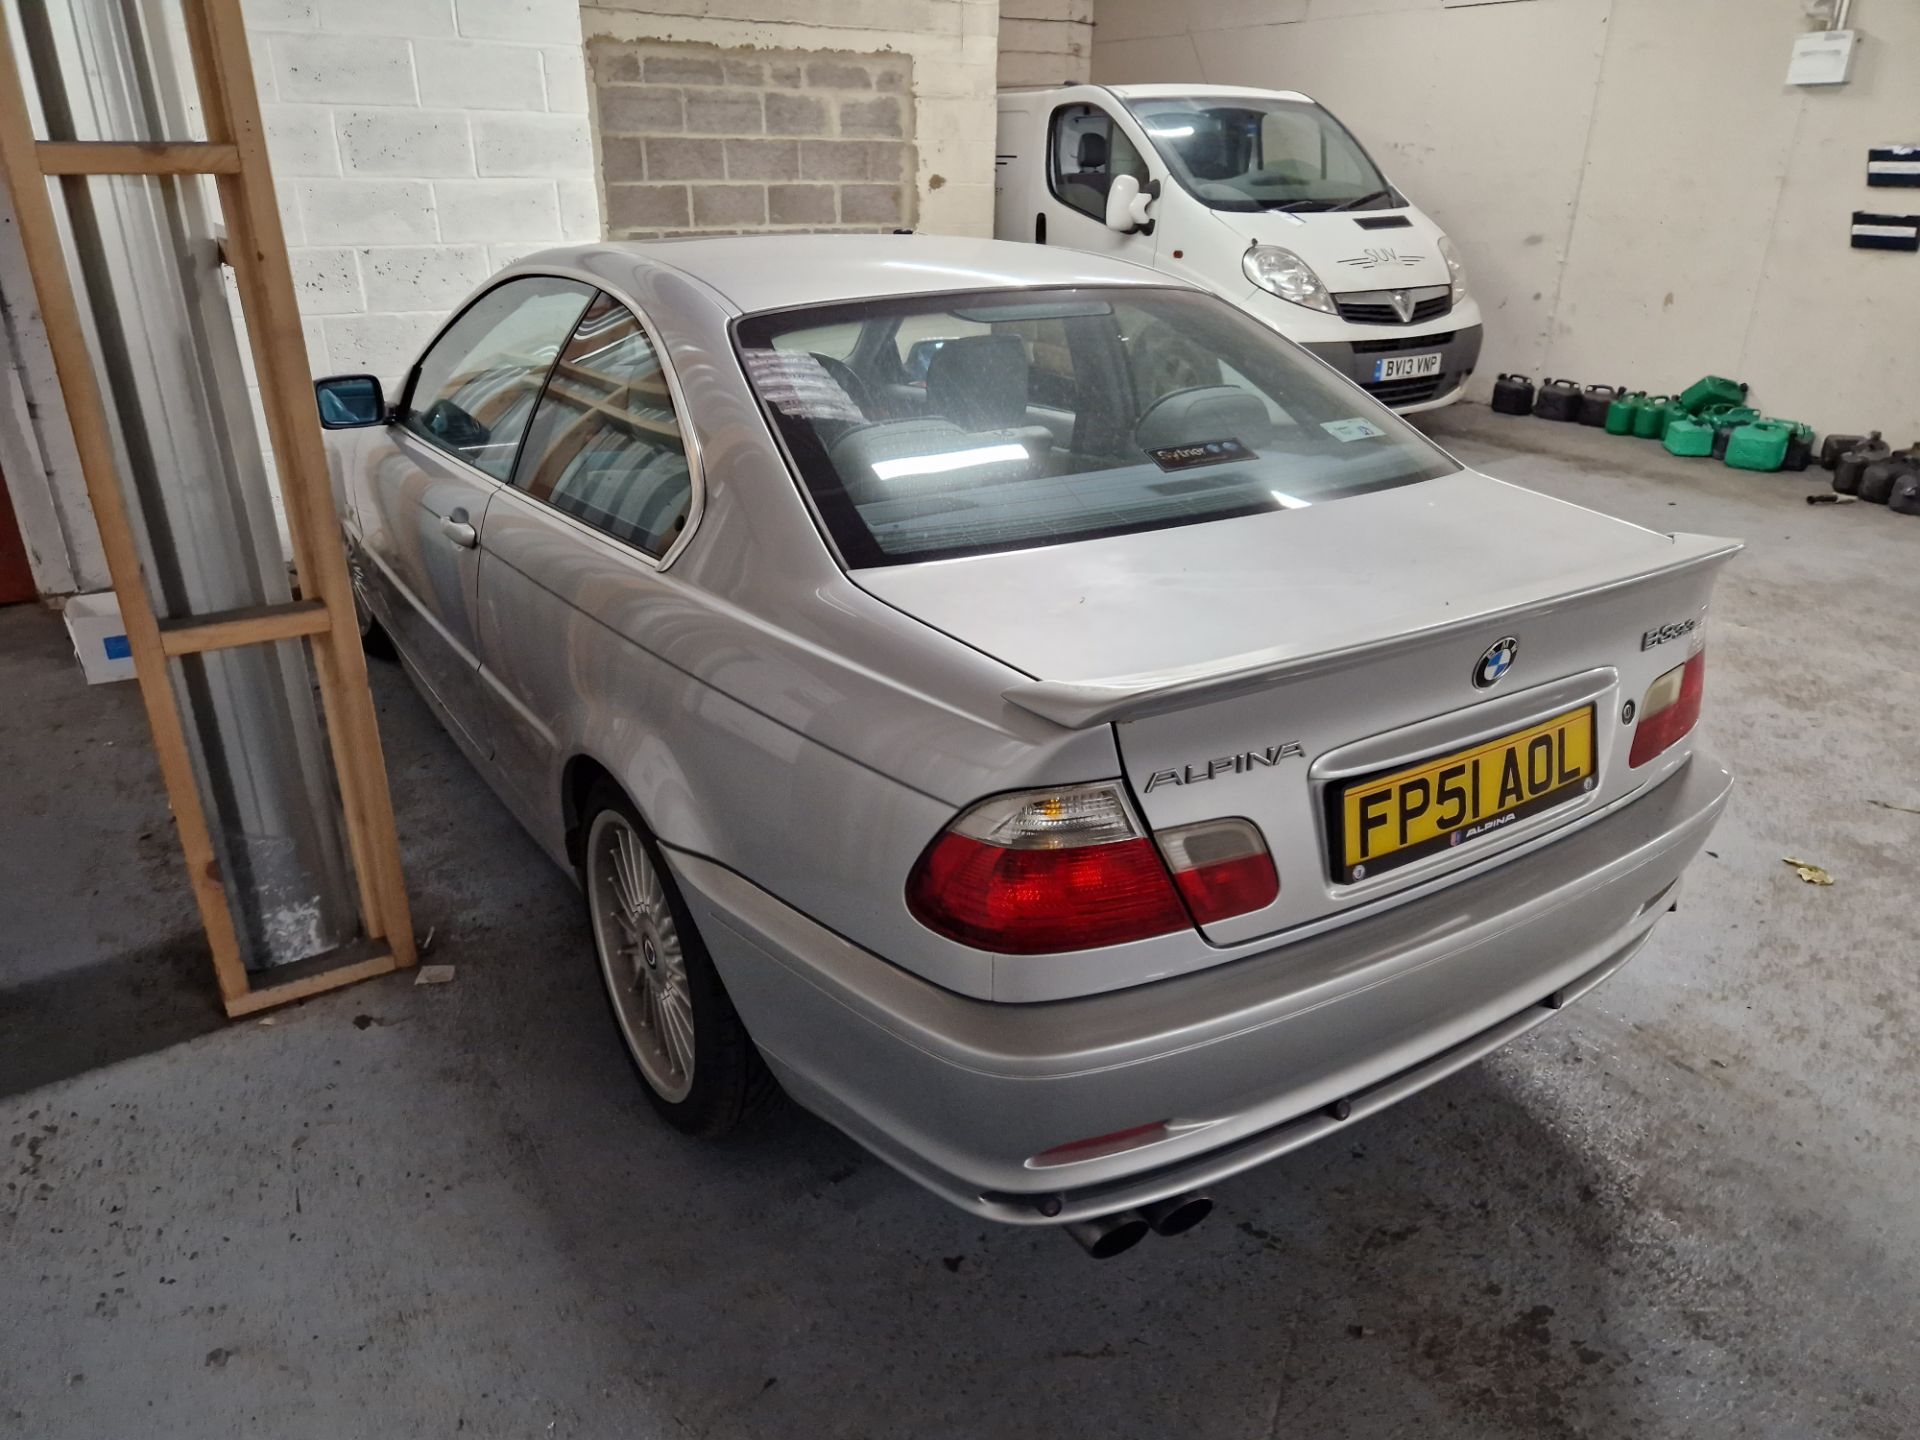 BMW Alpina B3 3.3 Saloon, Registration No. FP51 AOL, Mileage 138,000 (Estimate at time of - Image 4 of 6